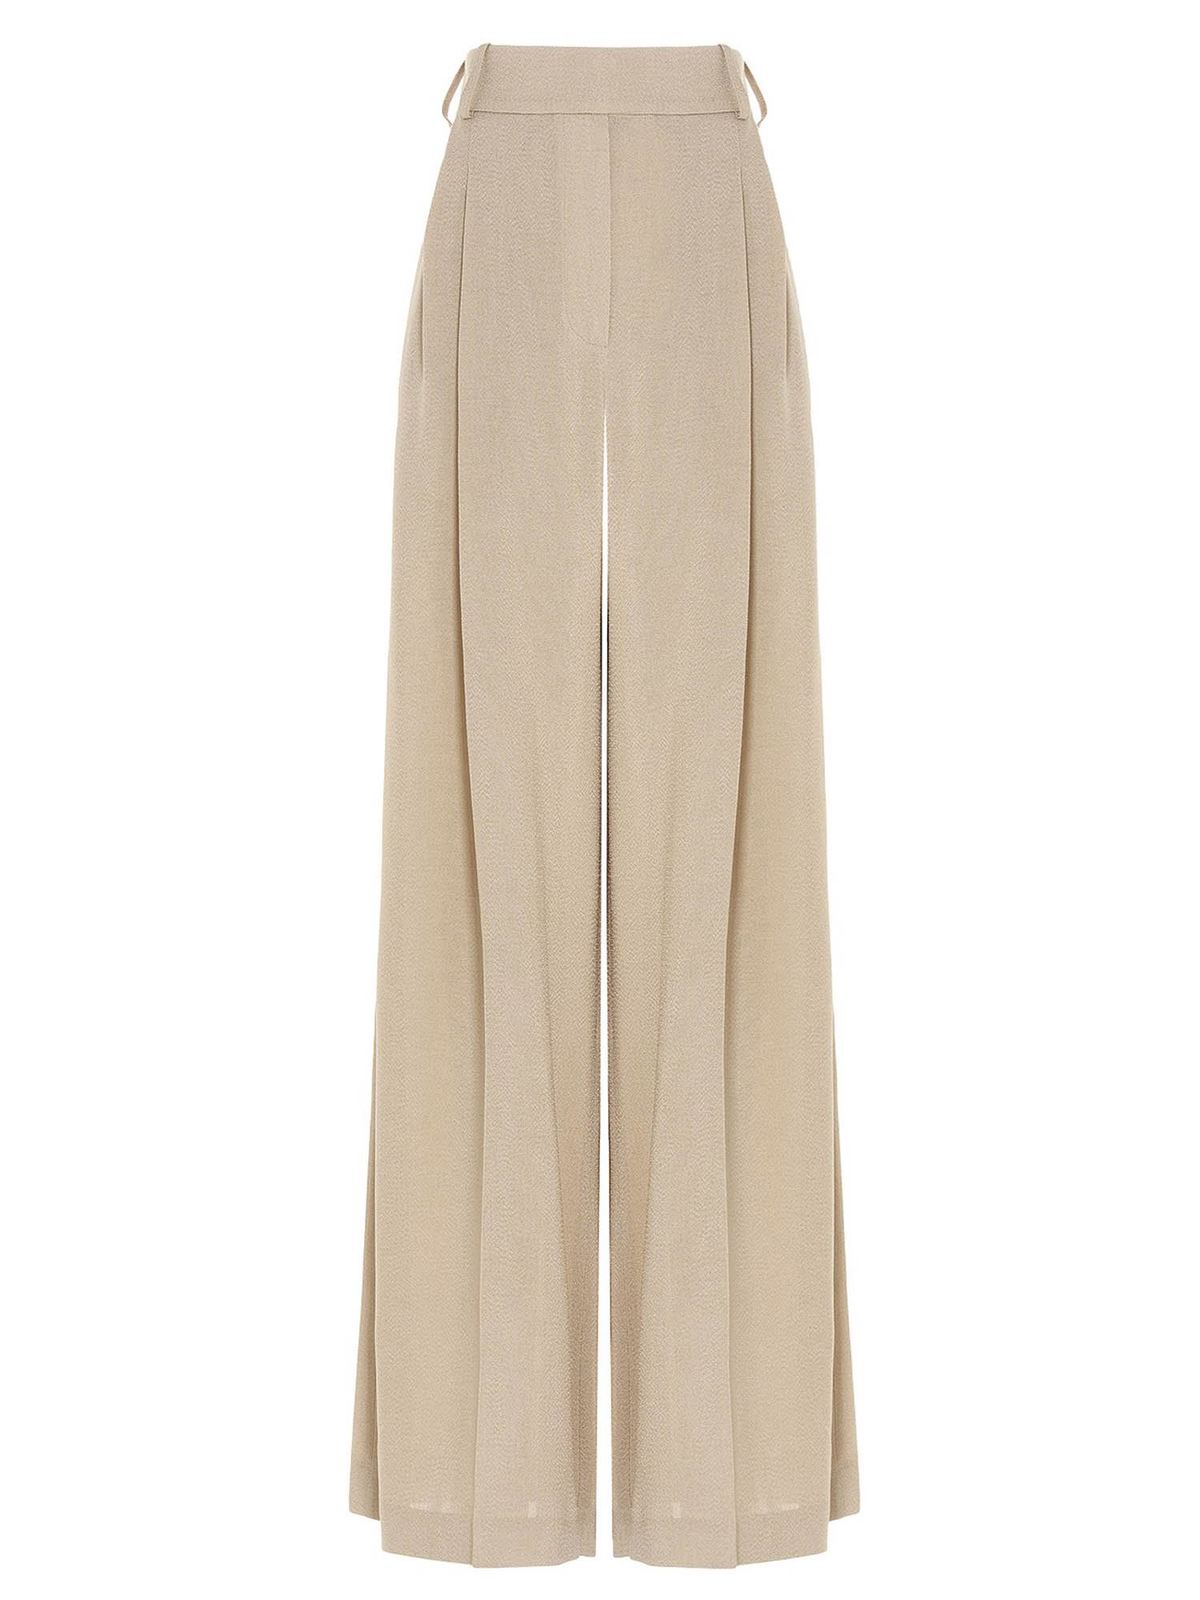 ALEXANDRE VAUTHIER PALAZZO PANTS IN SAND COLOR